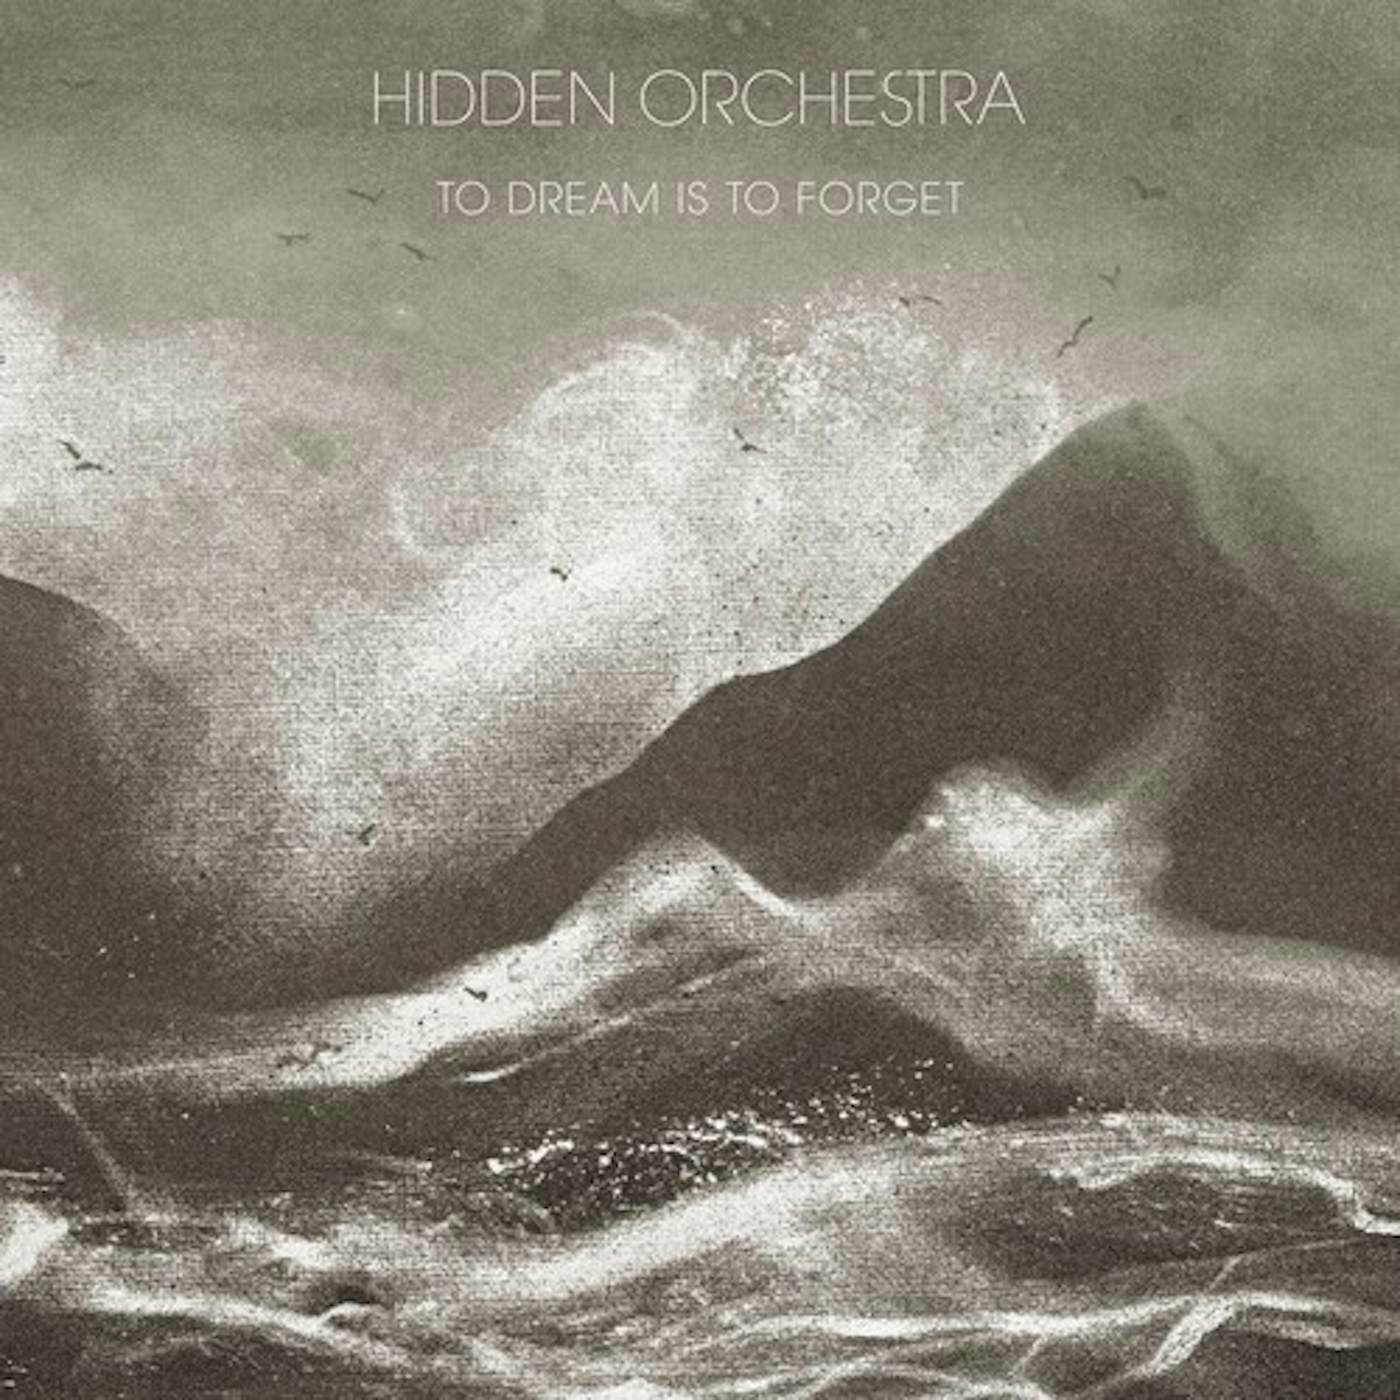 Hidden Orchestra TO DREAM IS TO FORGET Vinyl Record - Black Vinyl